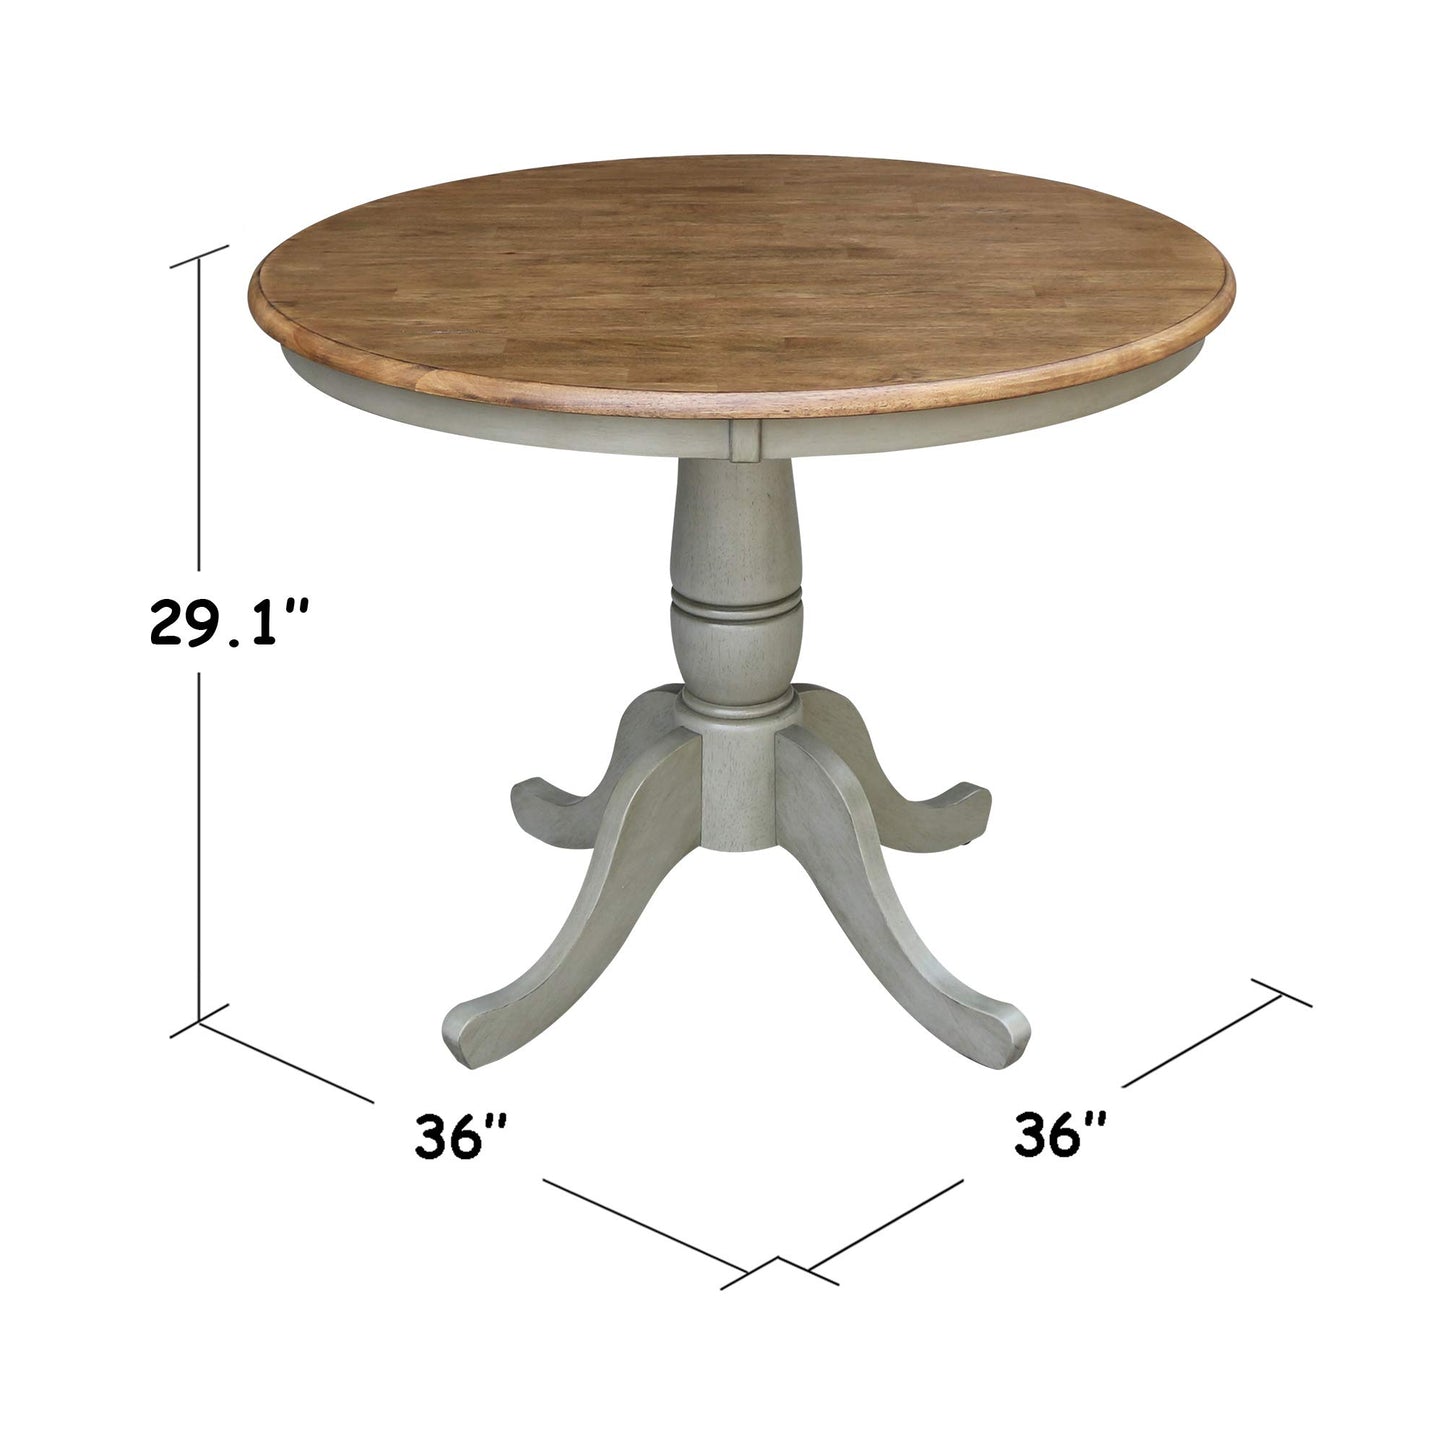 IC International Concepts International Concepts 36-inch Round Top Pedestal Dining Height Table, Distressed Hickory/Stone